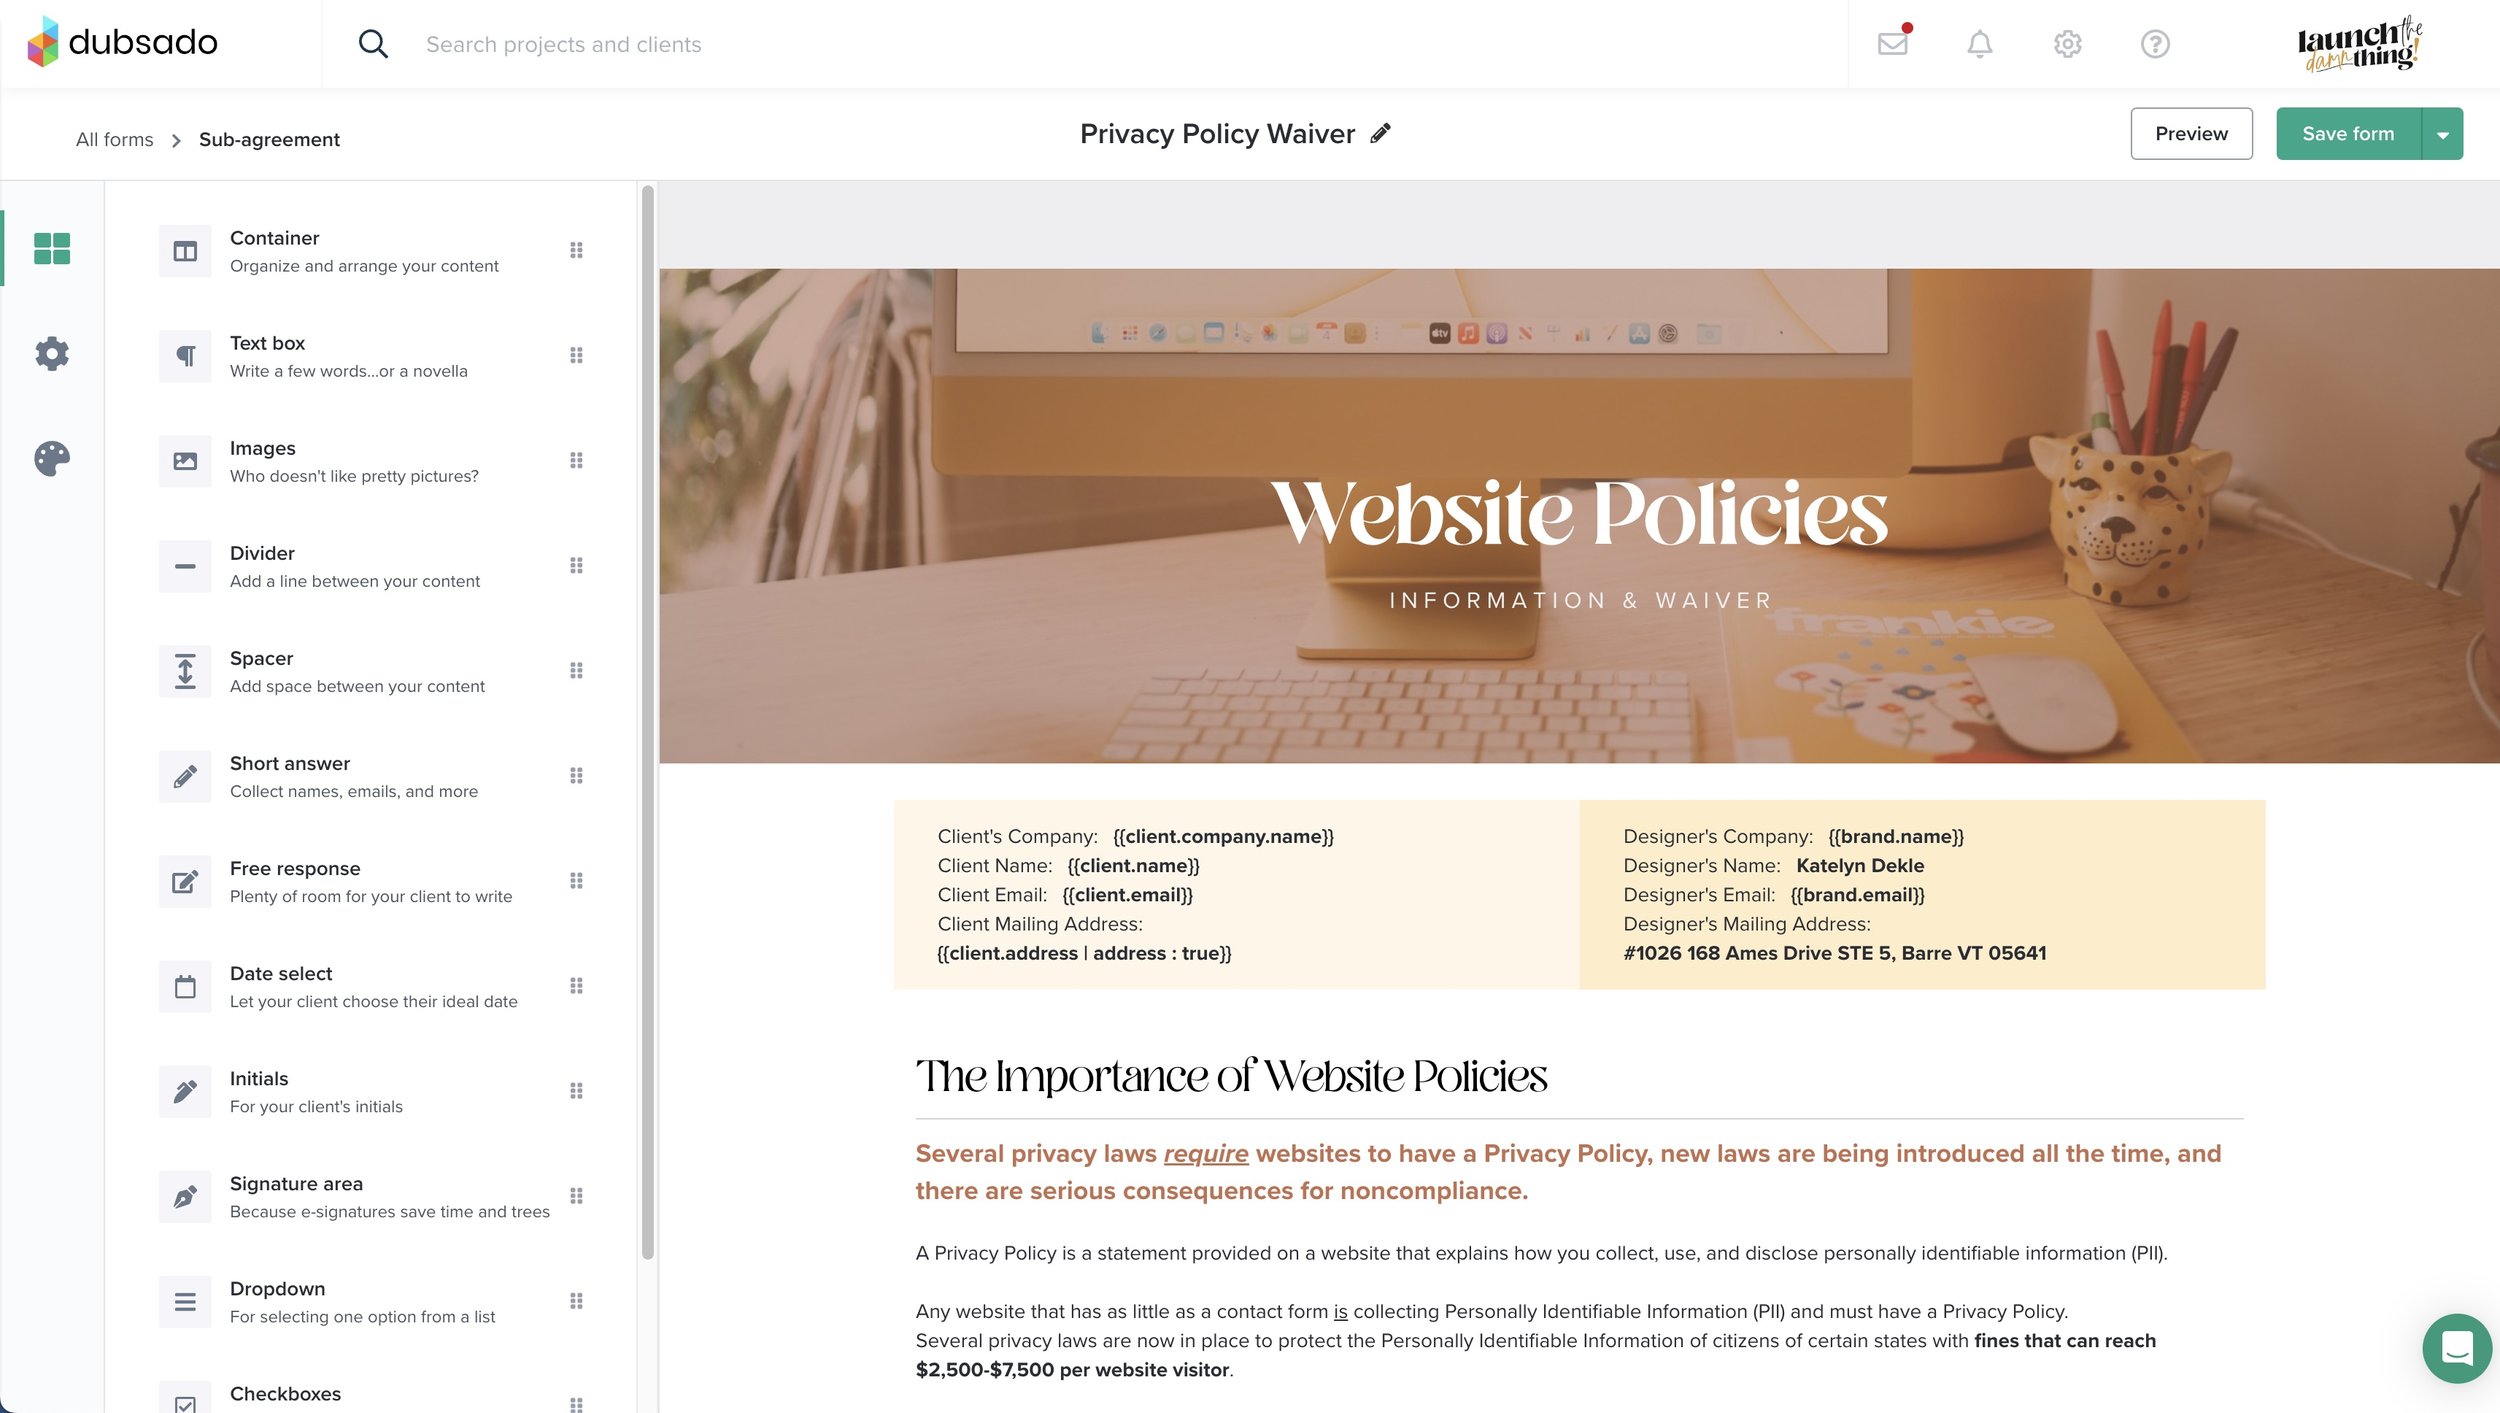 Website Policies Waiver, Sub-Agreement